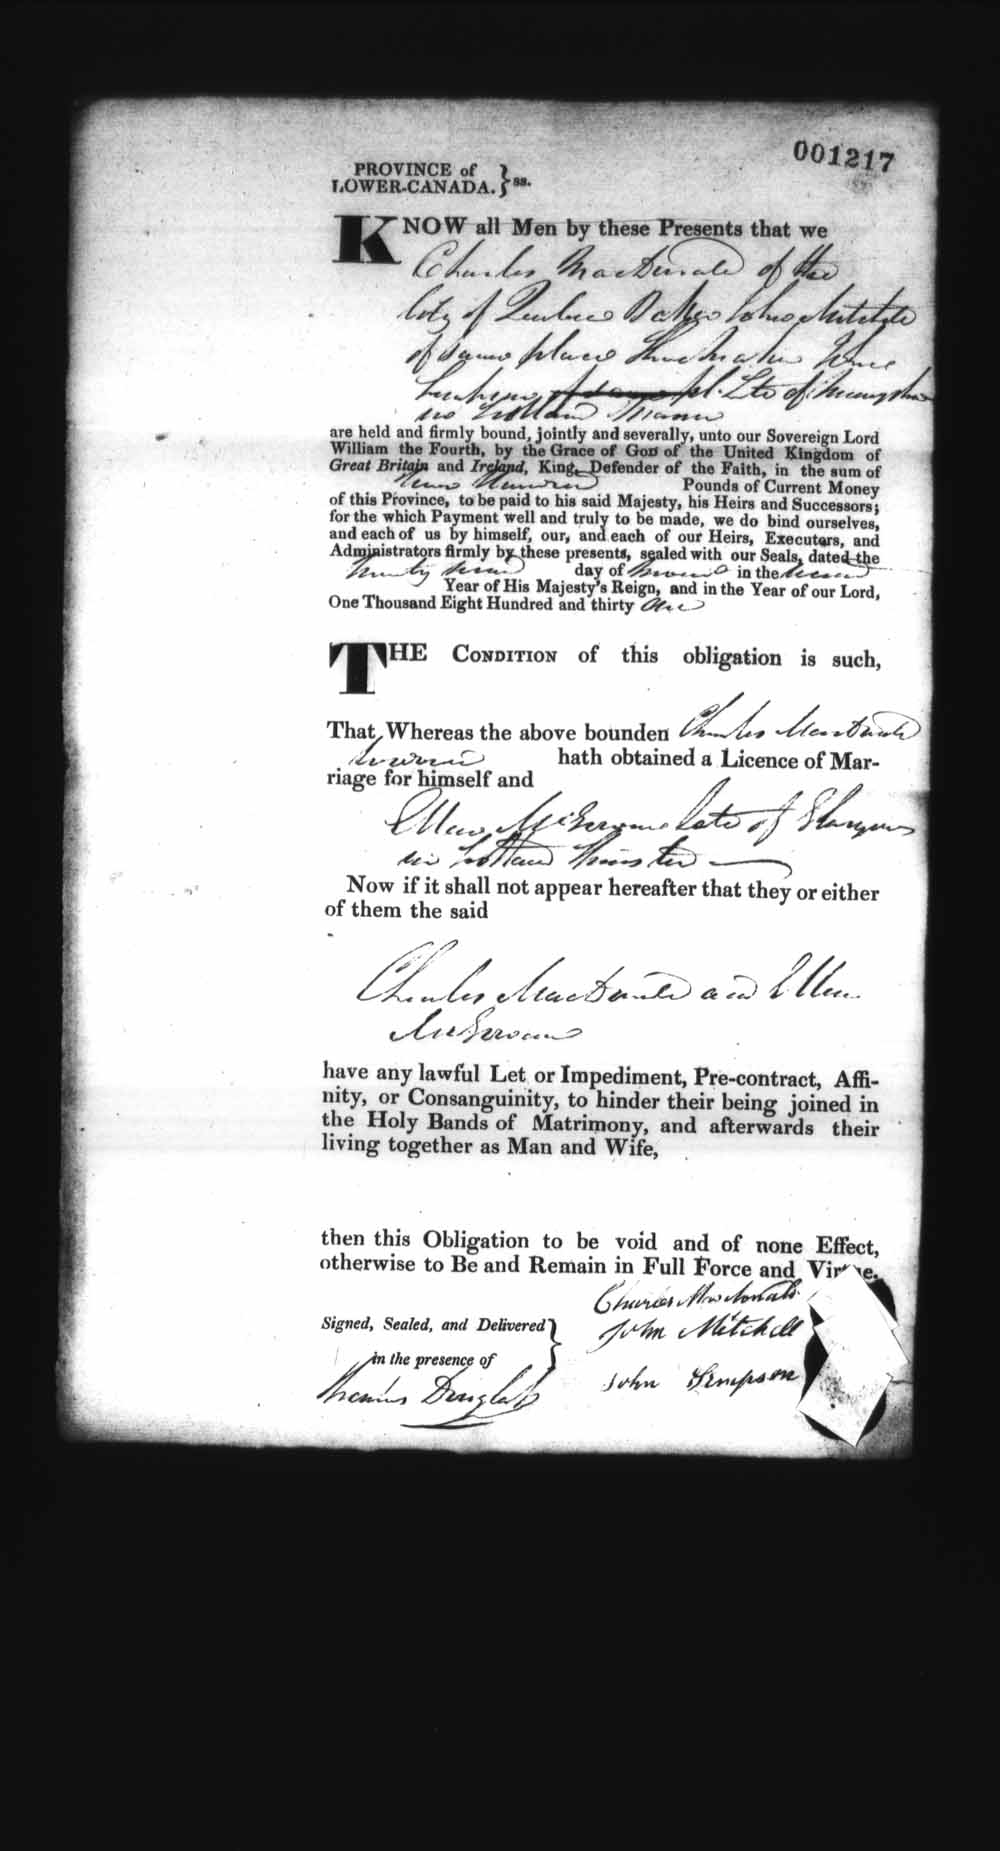 Digitized page of Upper and Lower Canada Marriage Bonds (1779-1865) for Image No.: e008237383